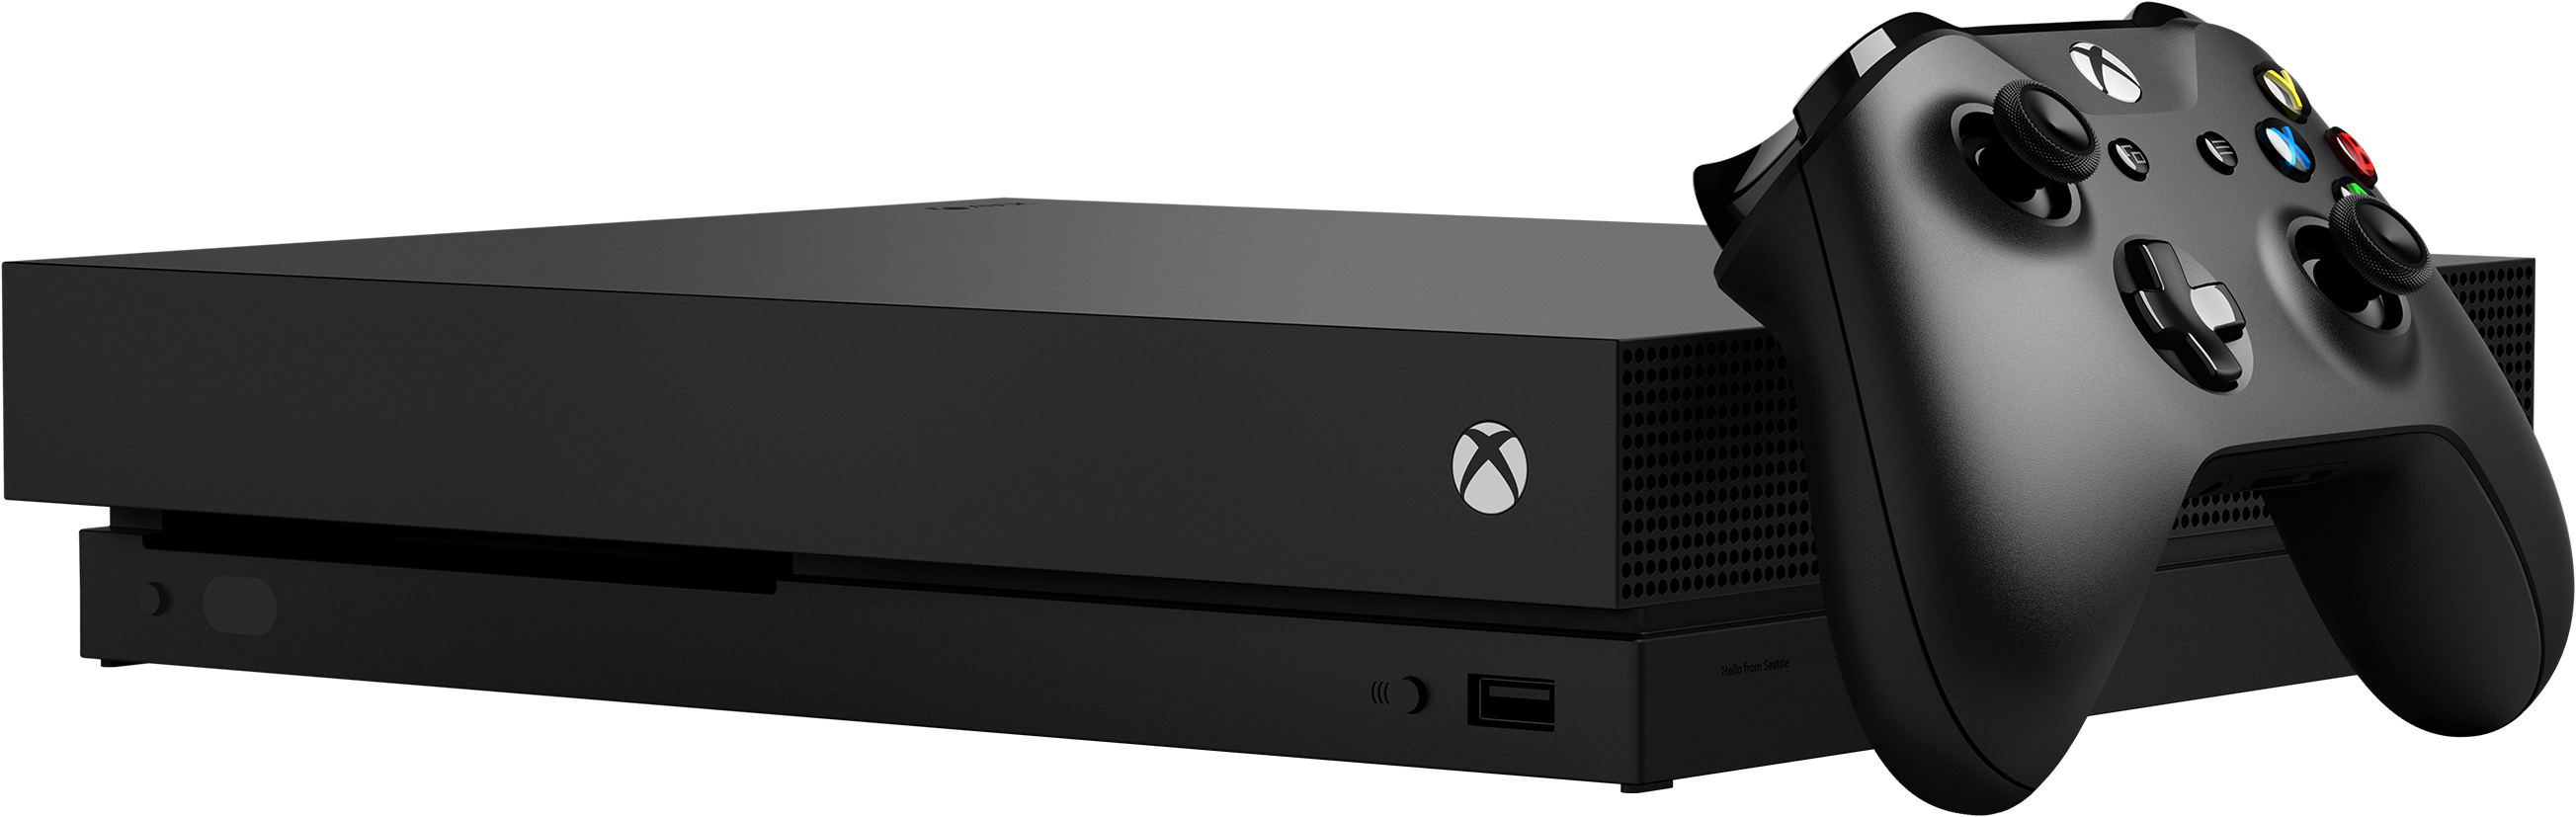 msrp xbox one x